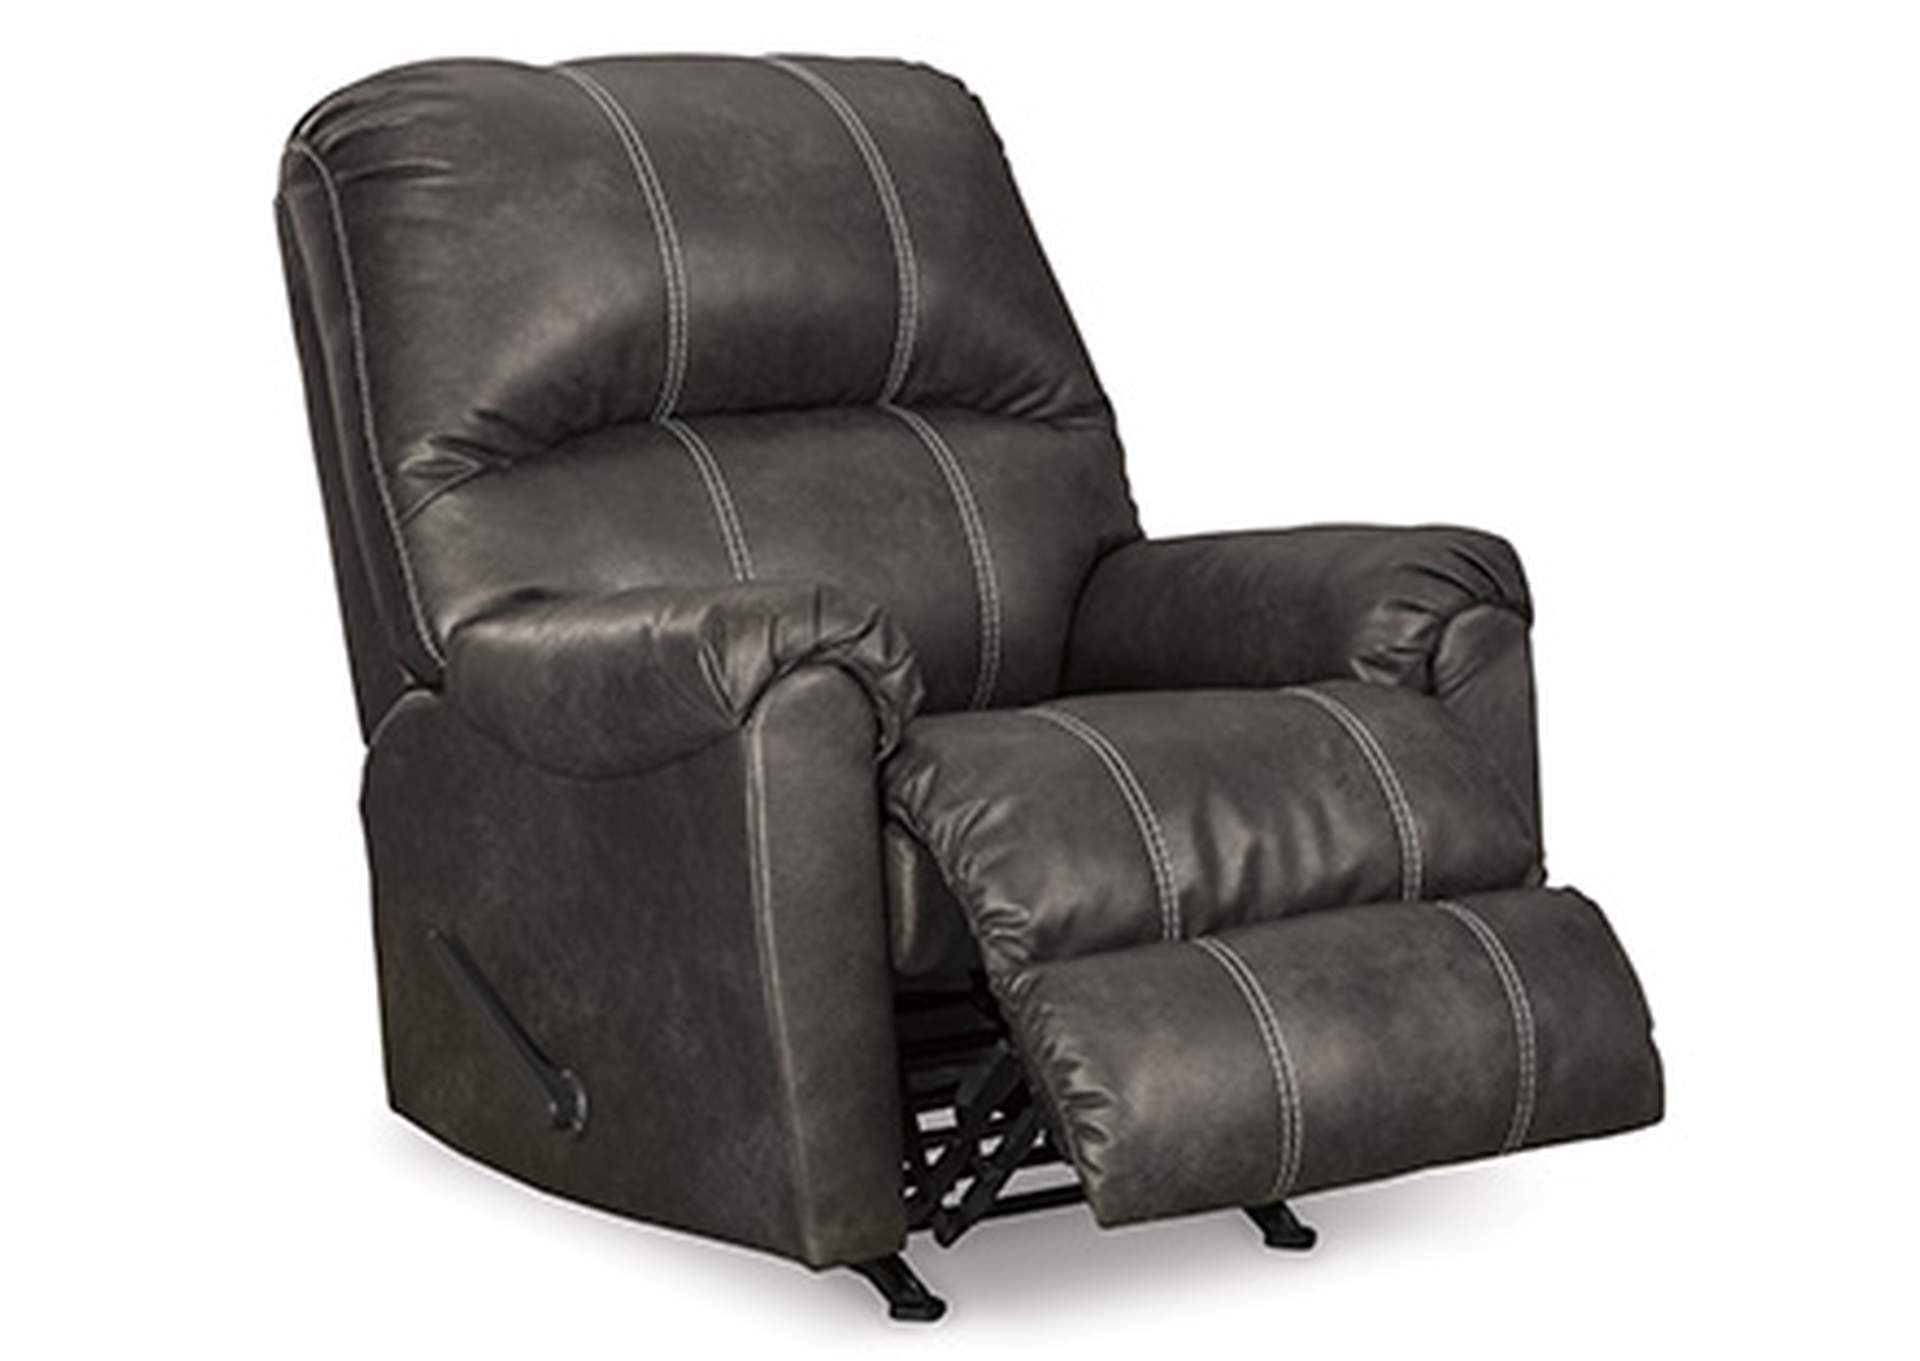 Kincord Recliner,Signature Design By Ashley